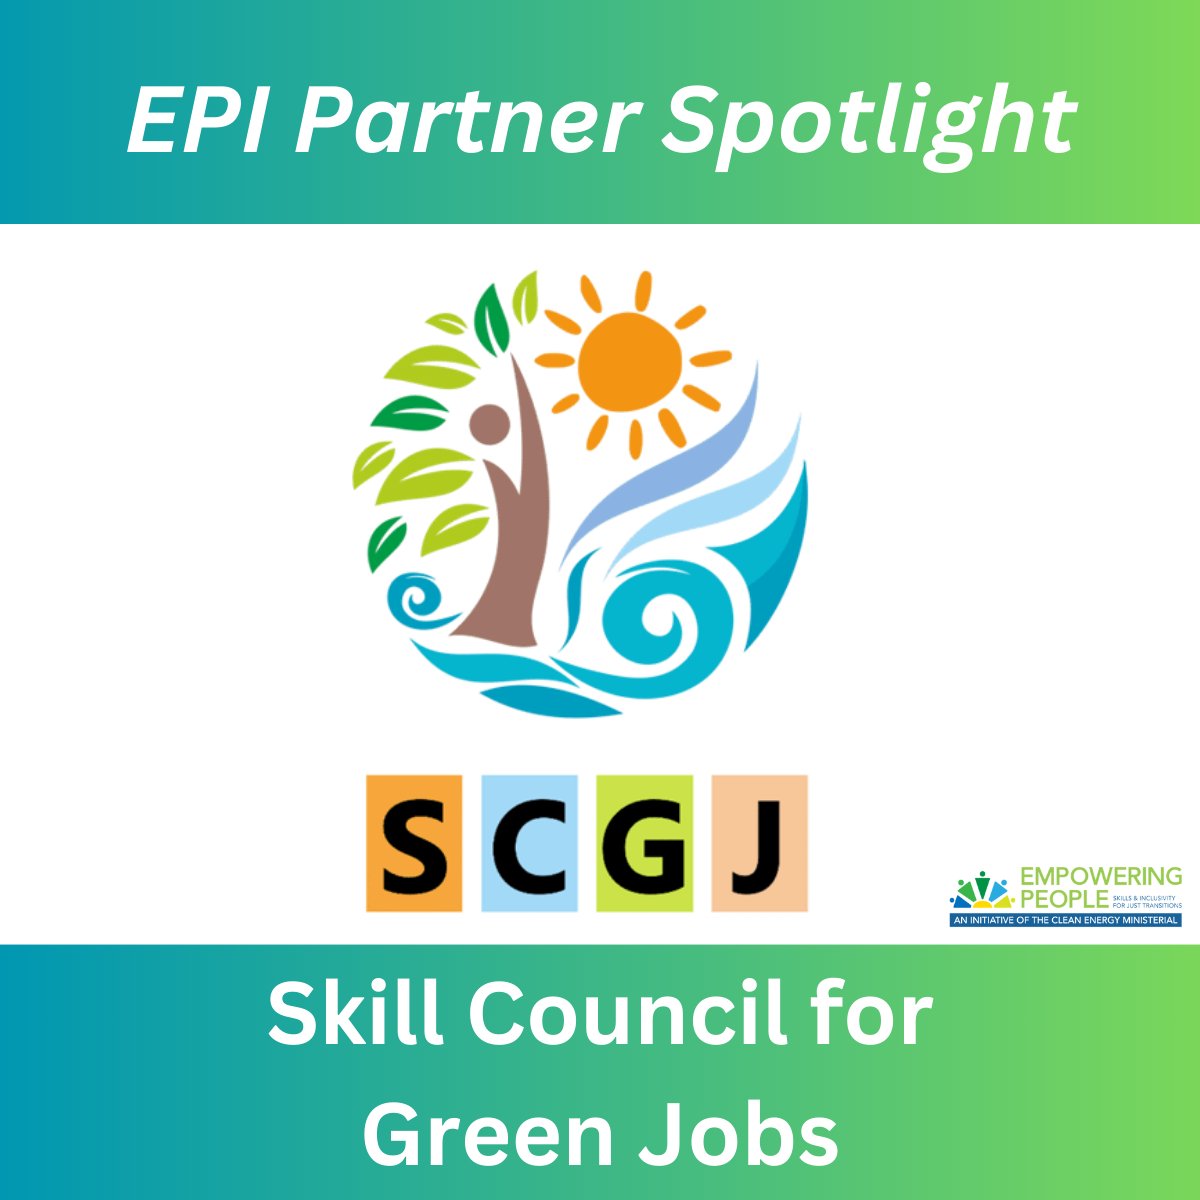 #DYK that @sscgreenjobs collaborates with training affiliates to develop #skills and qualifications for #green careers? Thousands of students and trainers across India have been trained by SCGJ, helping India to reach 50% renewable energy by 2030. ℹ sscgj.in